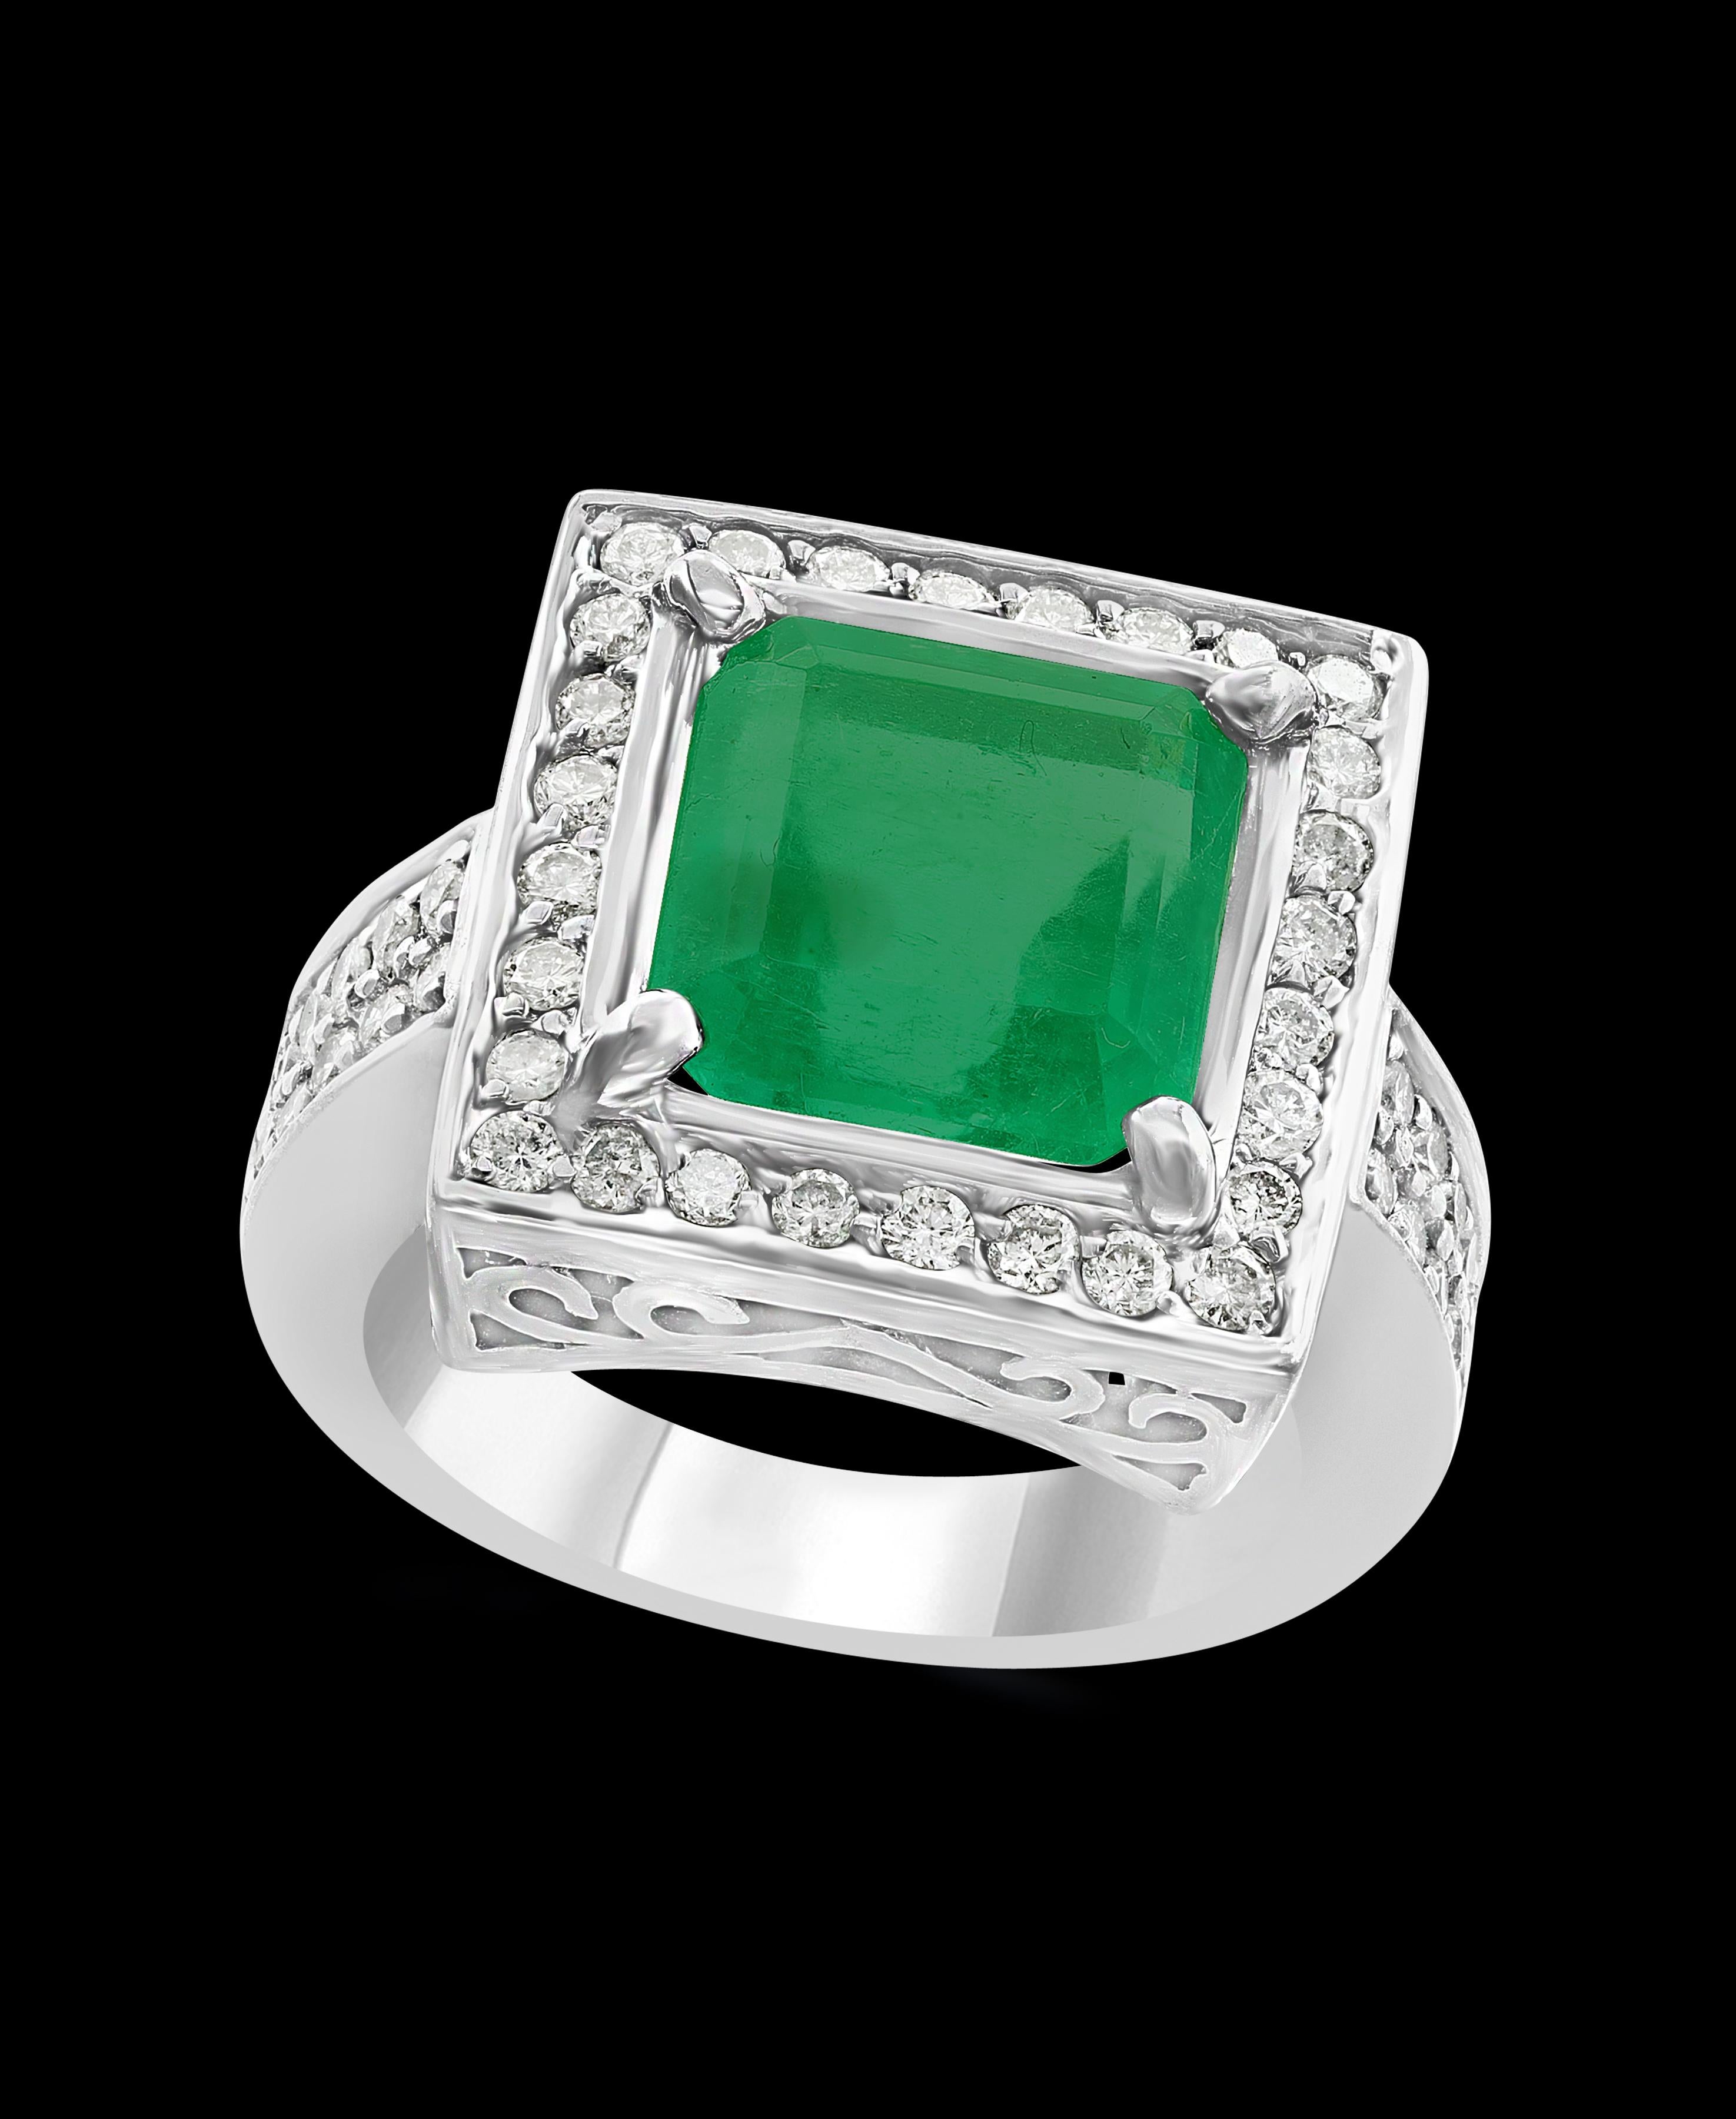 A classic, Cocktail ring 
4 Carat  Colombian Emerald and Diamond Ring, Estate, no color enhancement.
Gold: 14 carat white gold Weight: 12 gm
 Diamonds: approximate 1.85 Carat 
Emerald: 4.0 Carat 
Origin : Colombia 
Color: Deep  Green, Transparent